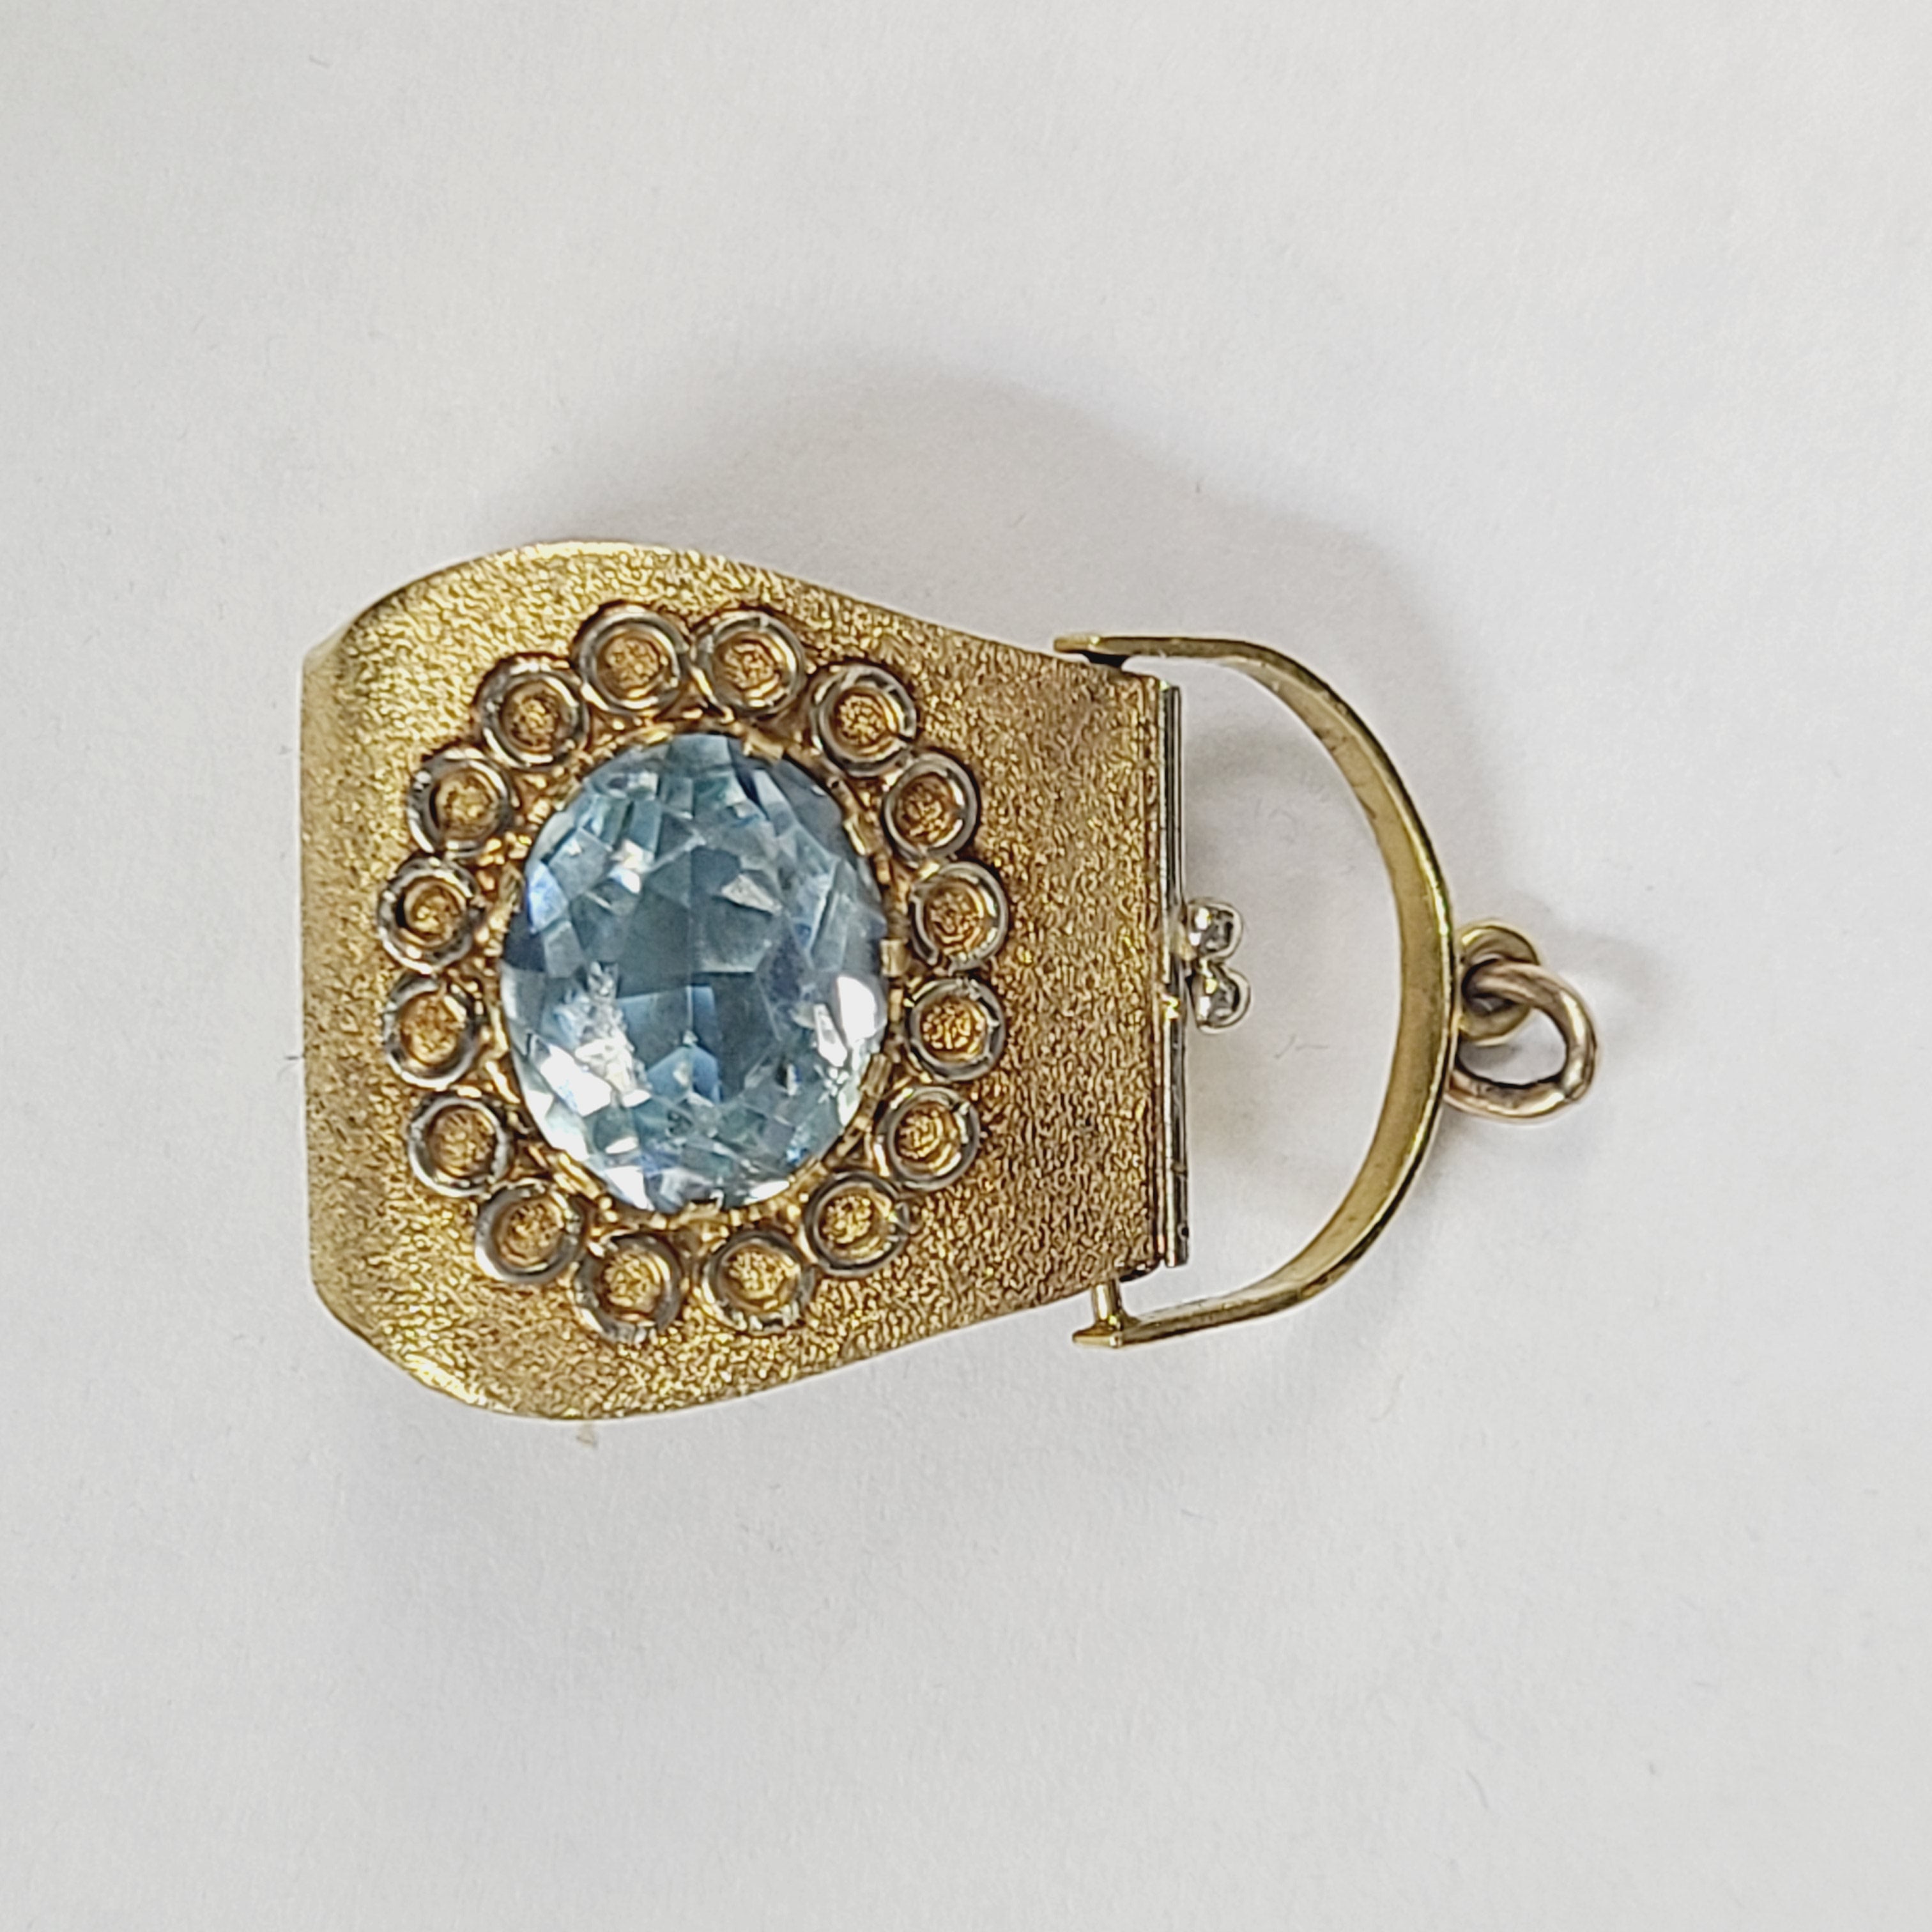 Vintage 18K Yellow Gold Purse Pendant Charm with Blue Stone